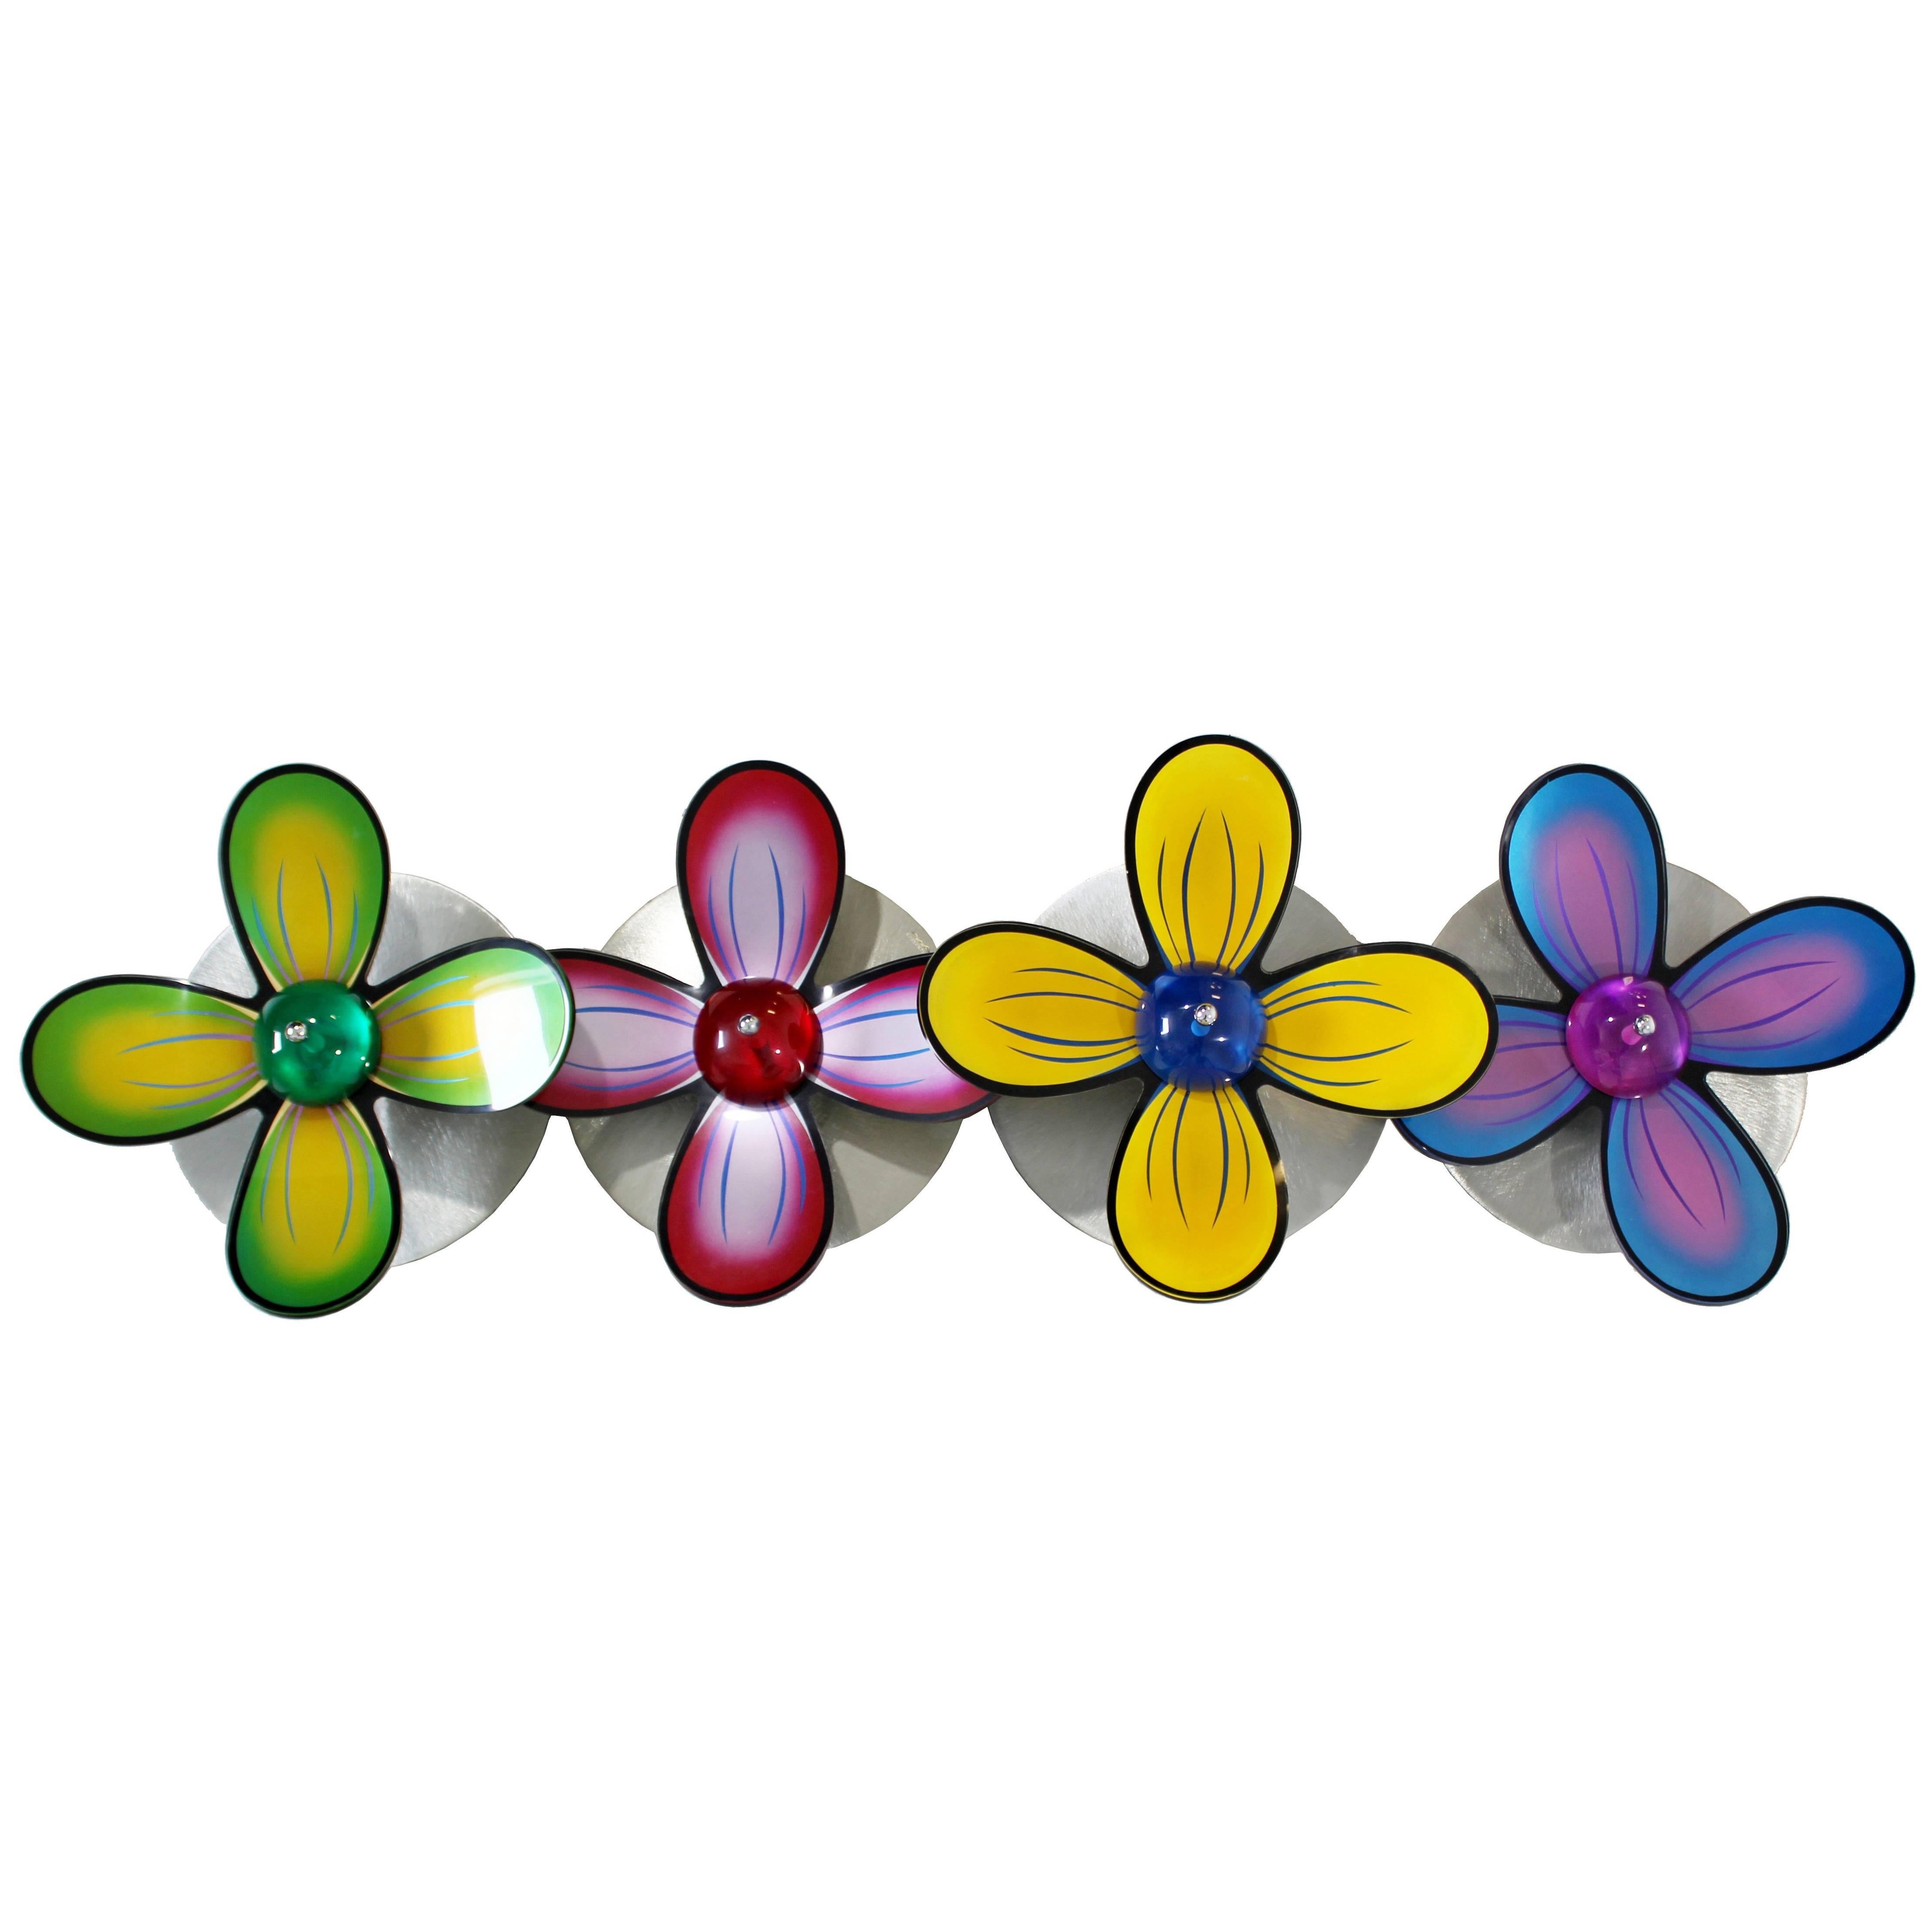 Contemporary Polished Metal Colored Lucite Acrylic Flower Wall Sculpture Haziza